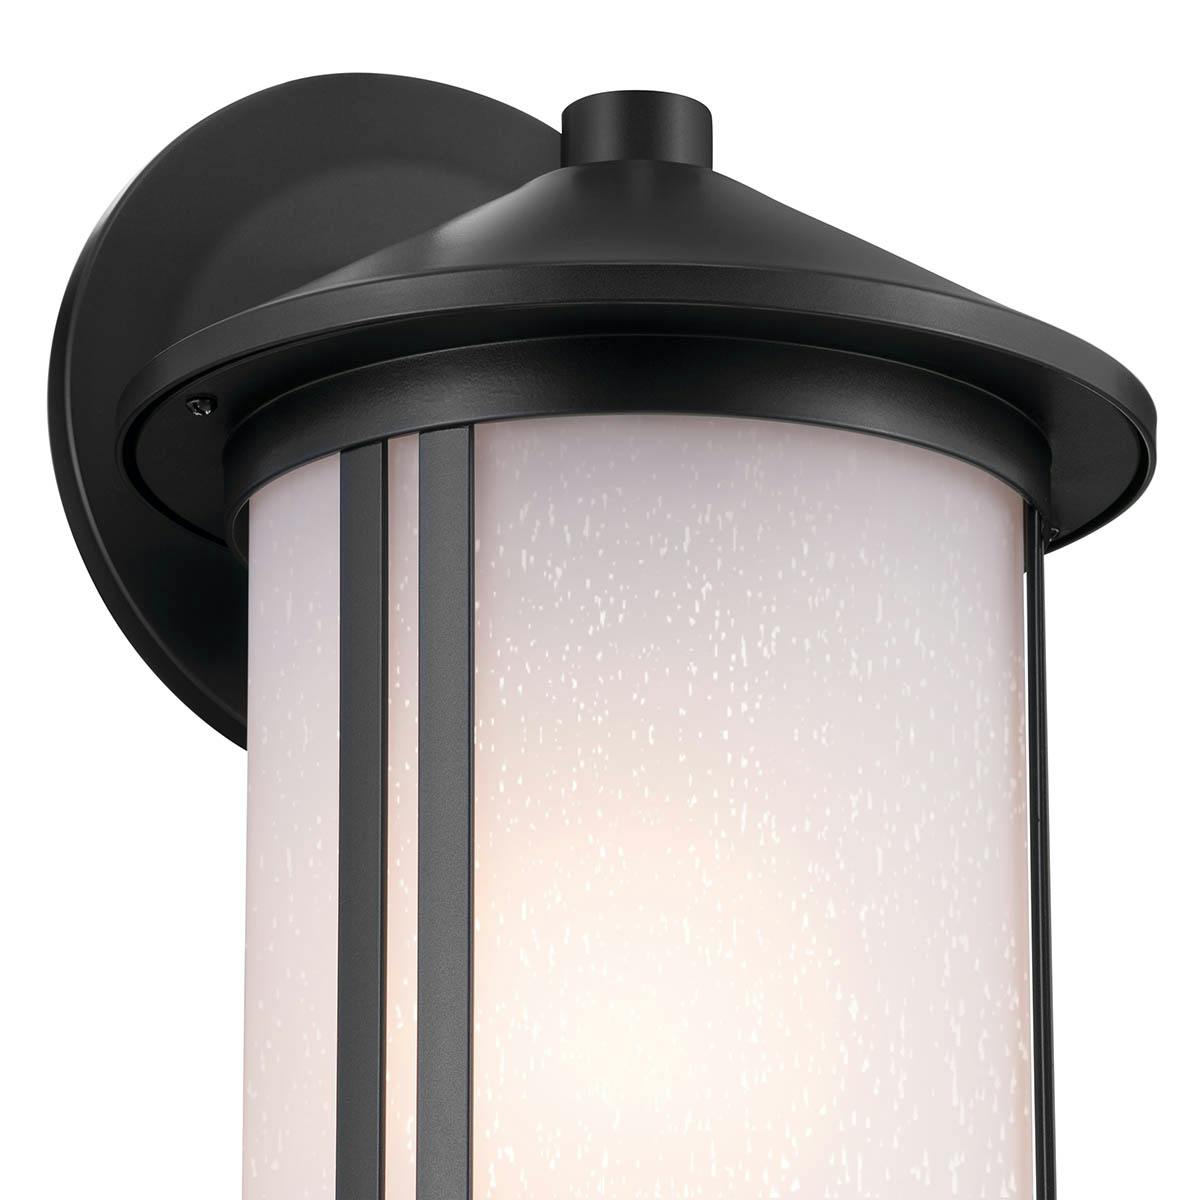 Close up view of the Lombard 16.5" 1 Light Wall Light Black on a white background